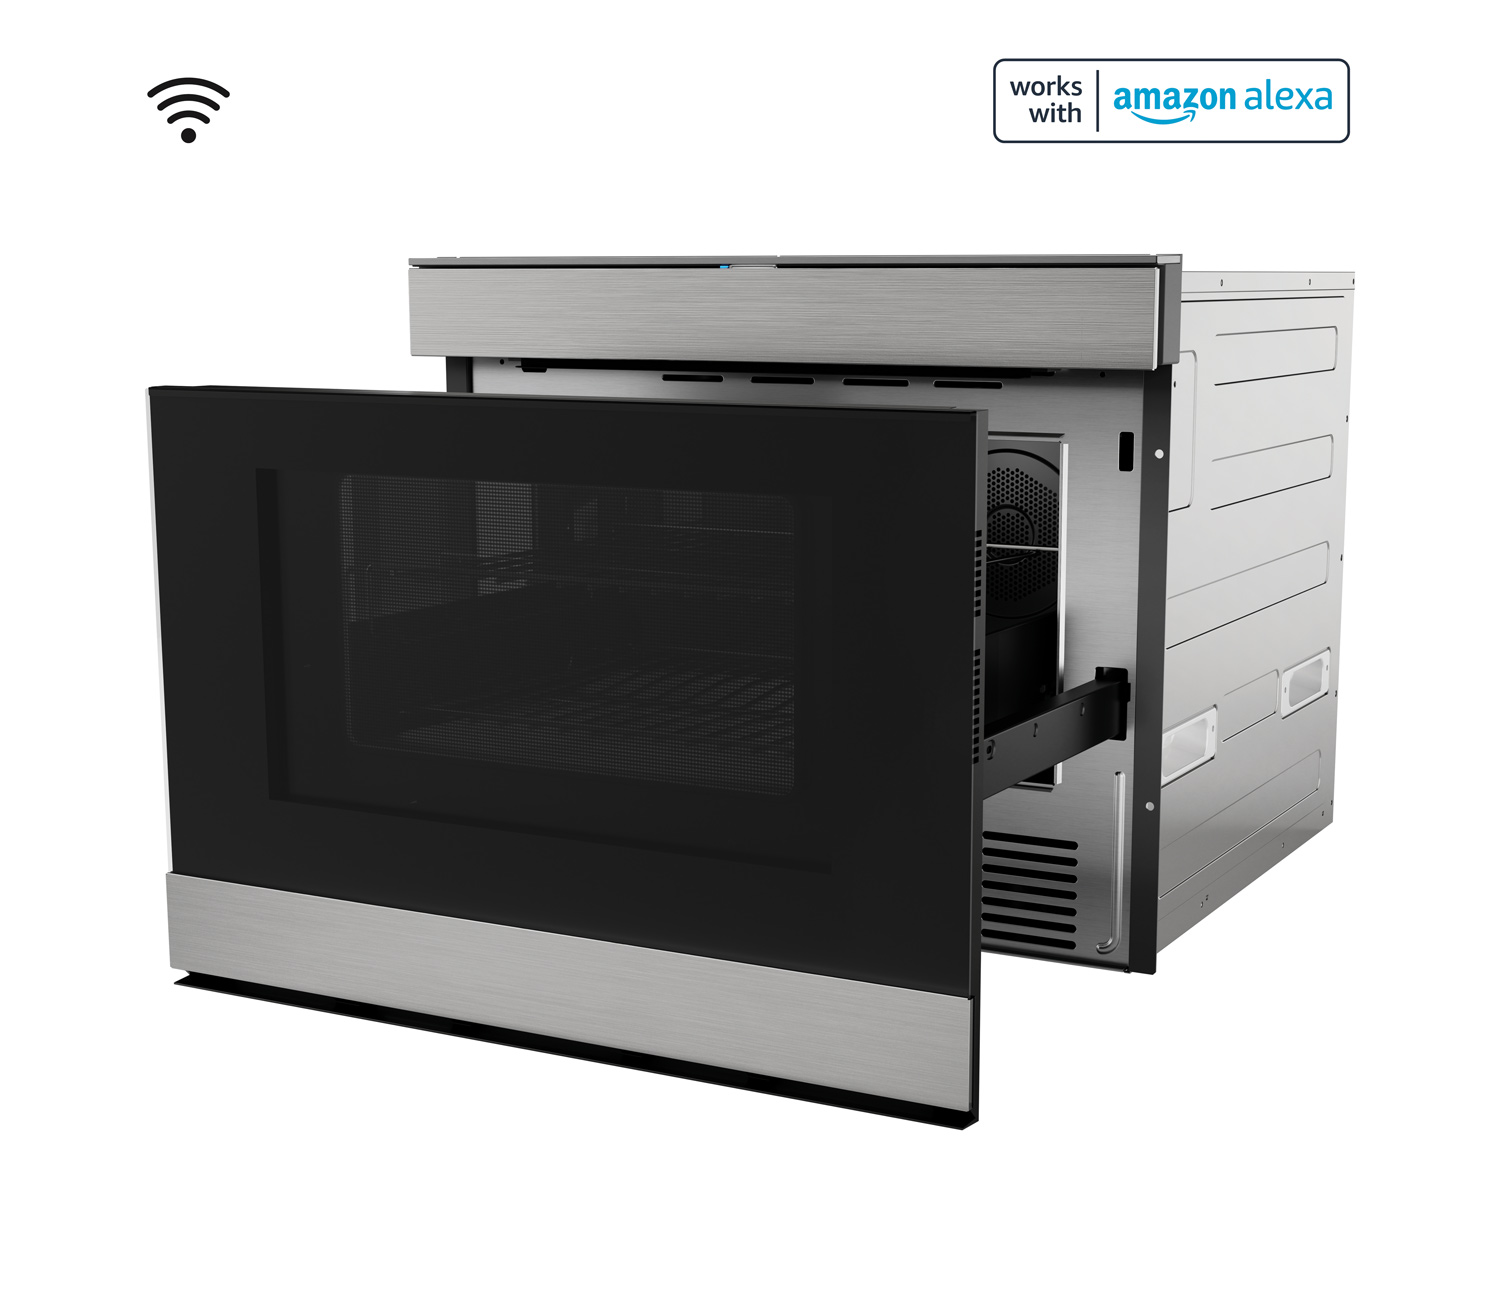 The Newest Helper In The Kitchen: Convection Microwave Ovens - The